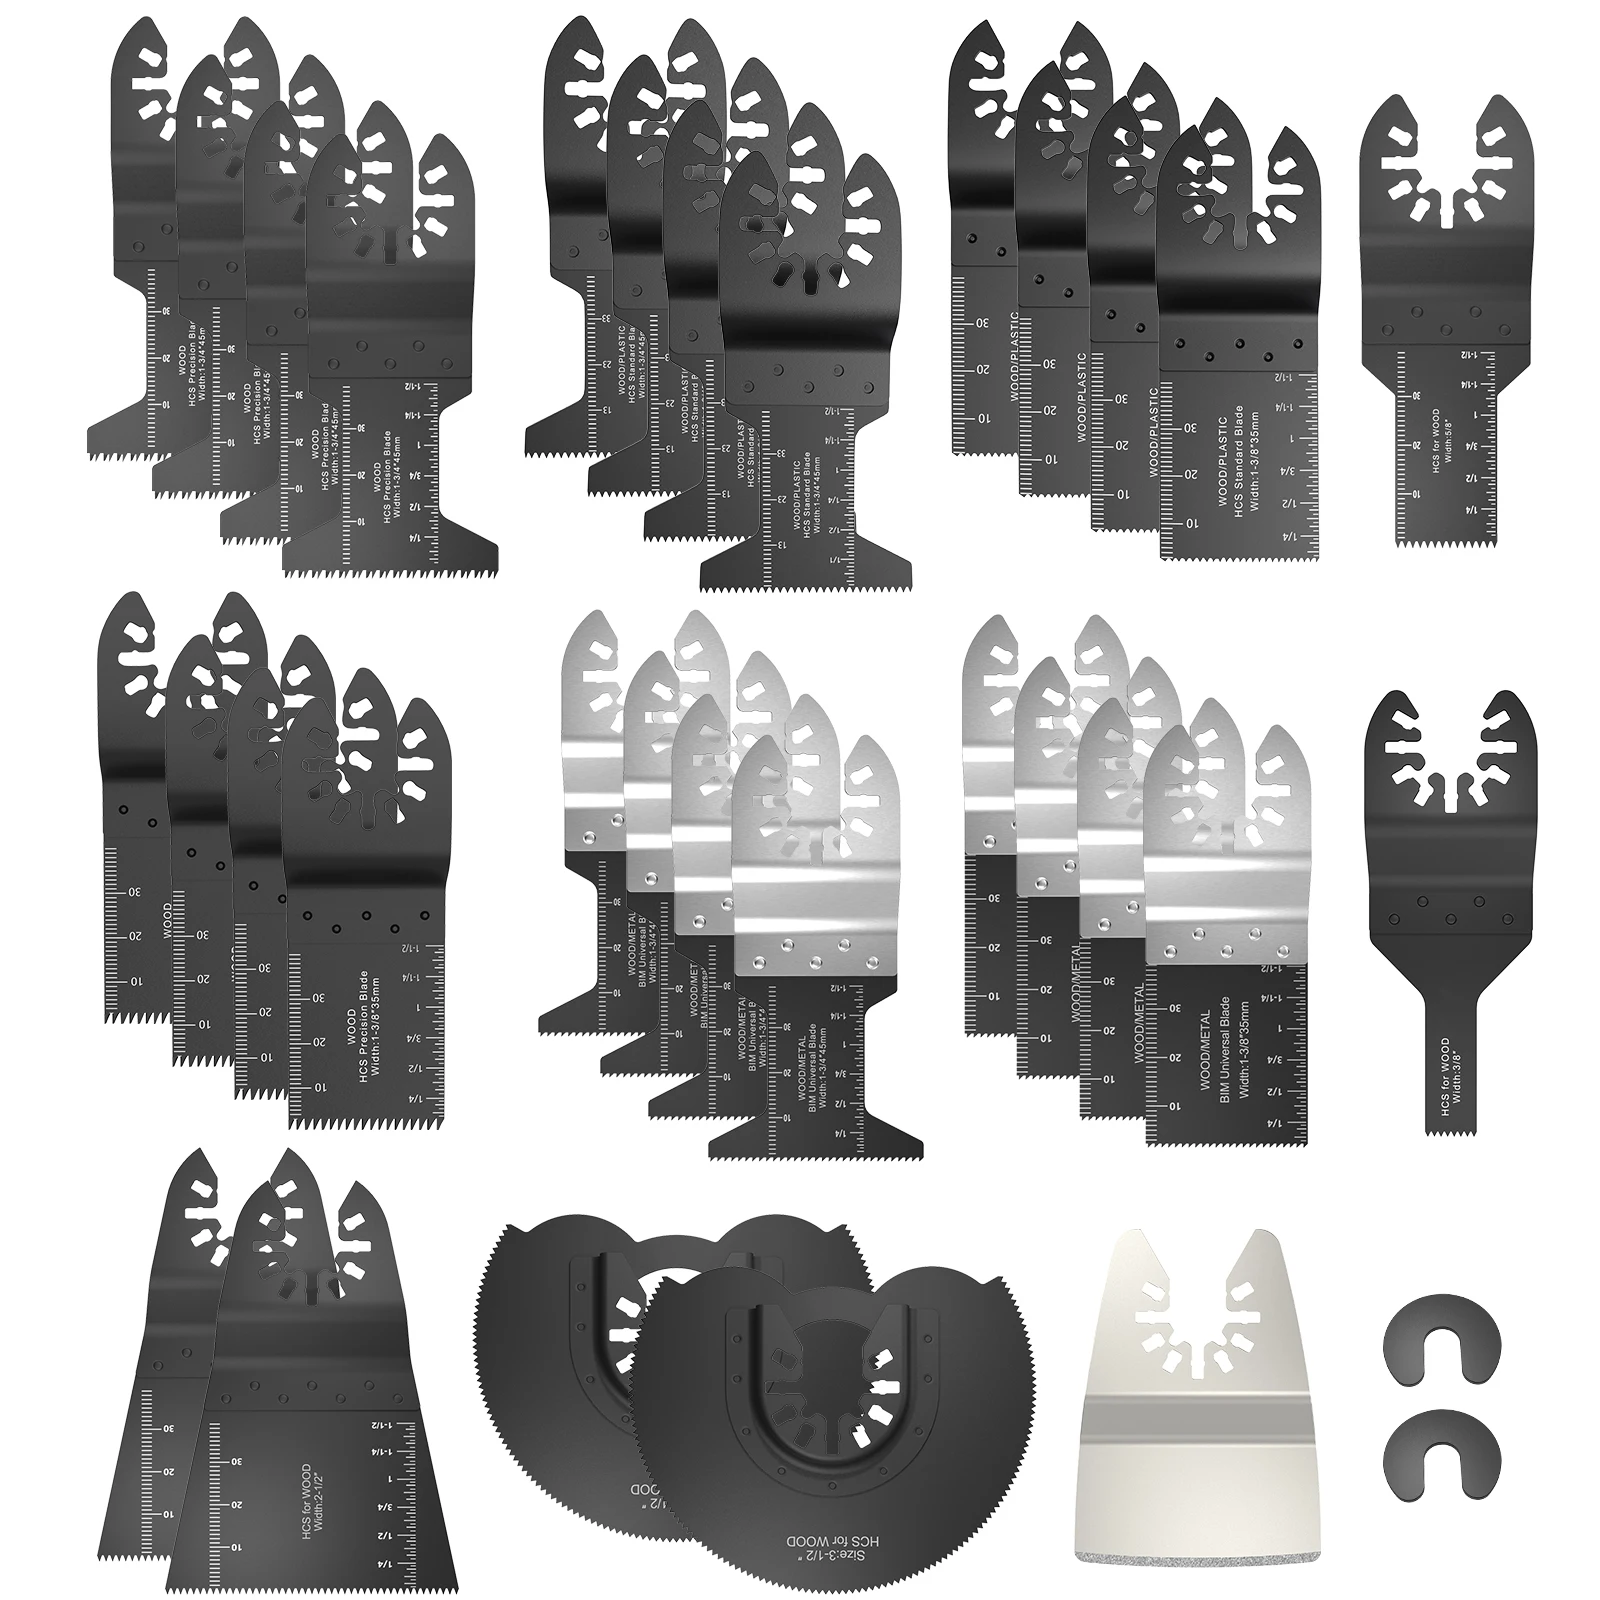 

33Pcs Multitool Blades HCS Saw Blades Quick Release Oscillating Blades Fast Cutting Saw Blades For Wood Plastic Metal Cutting